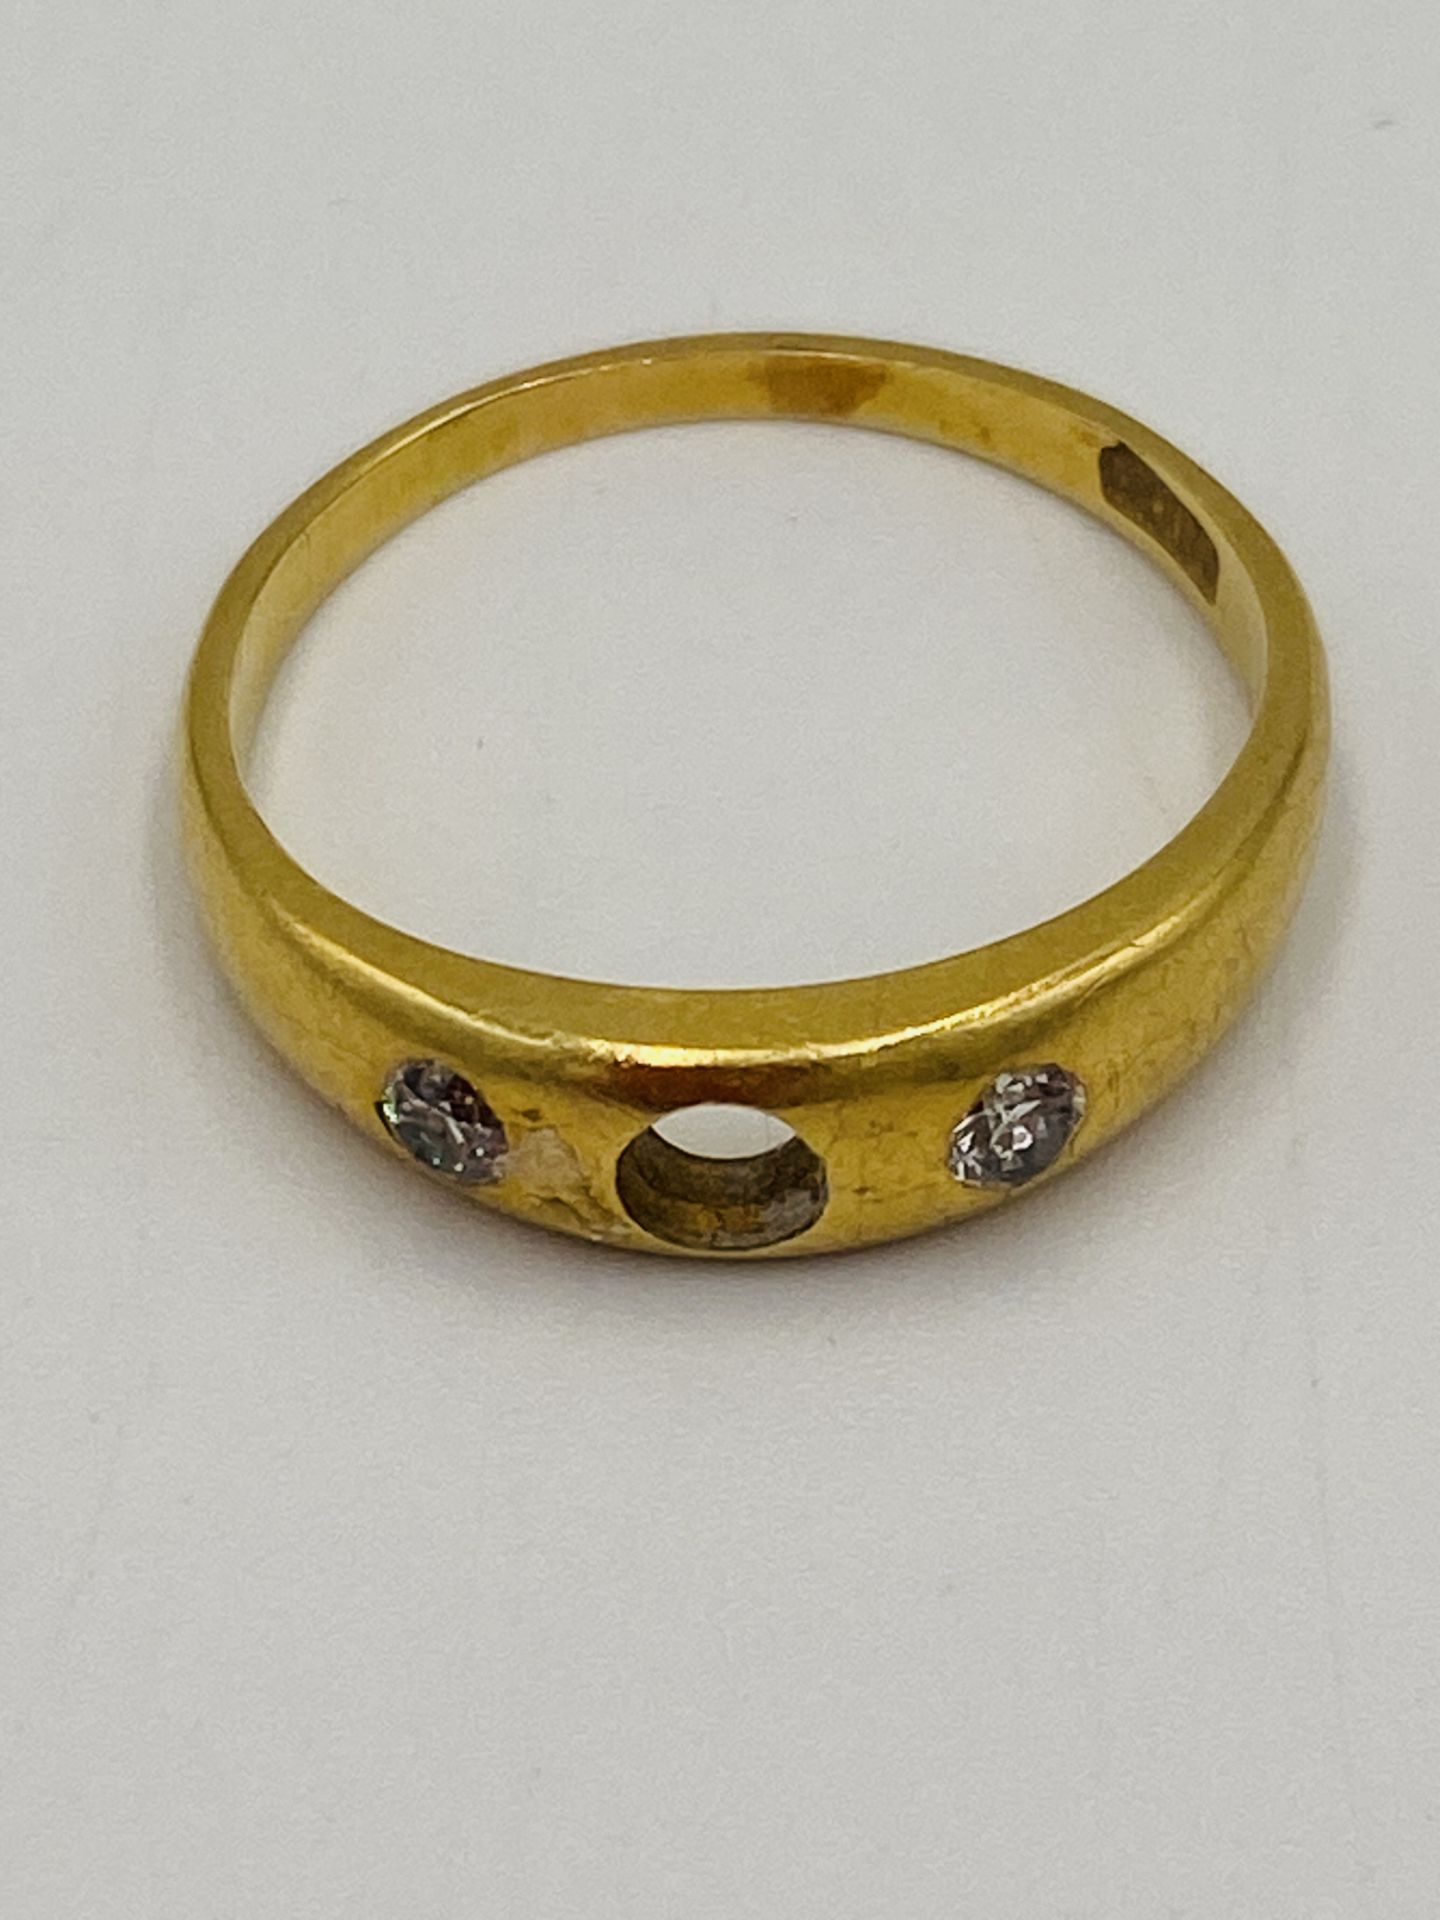 18ct gold ring - Image 6 of 6